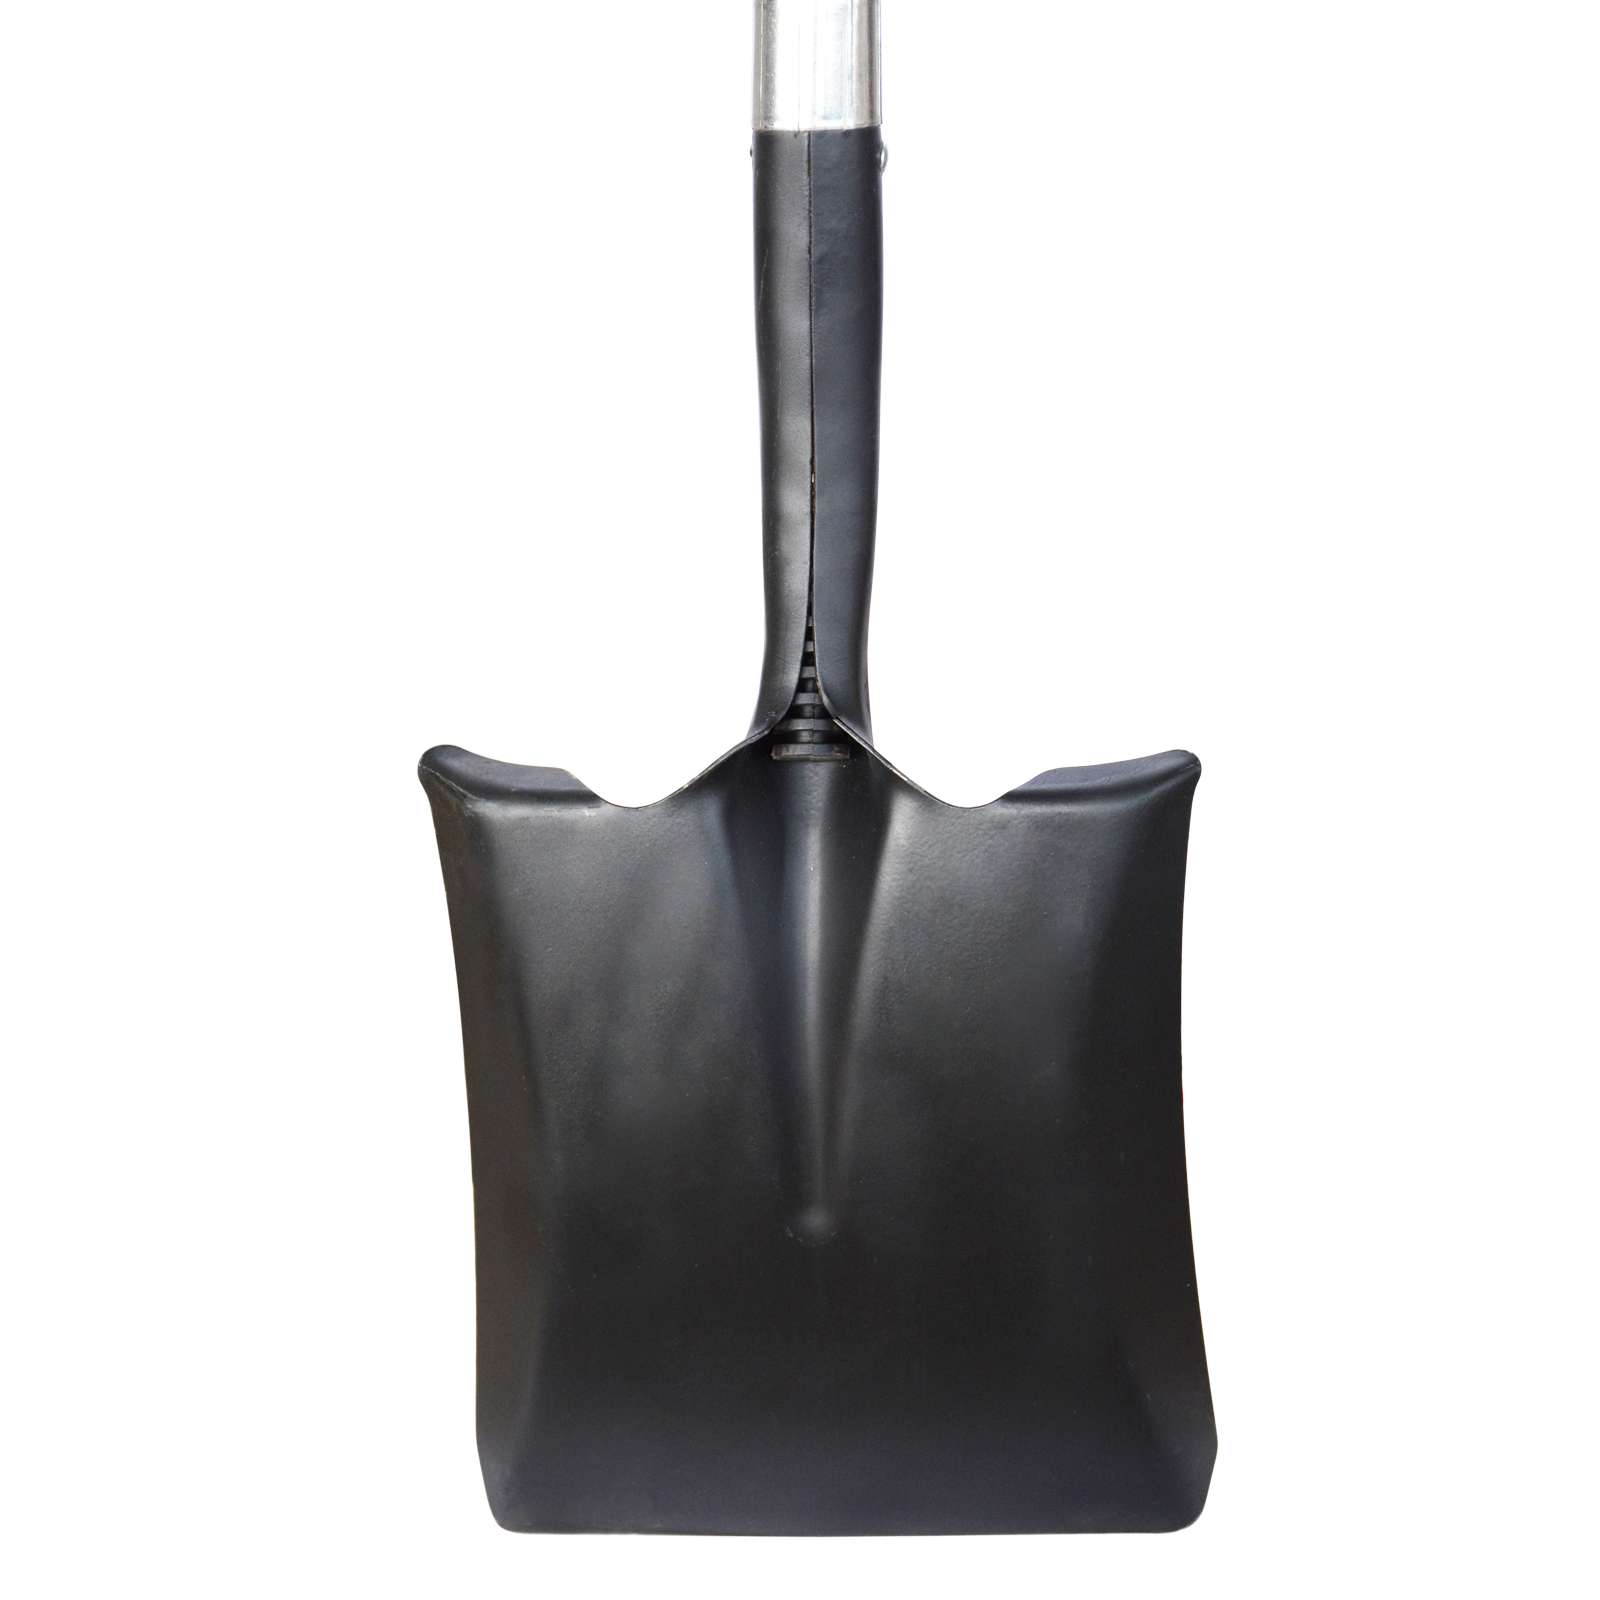 Med Square Spade with Fiberglass Long Handle - 3